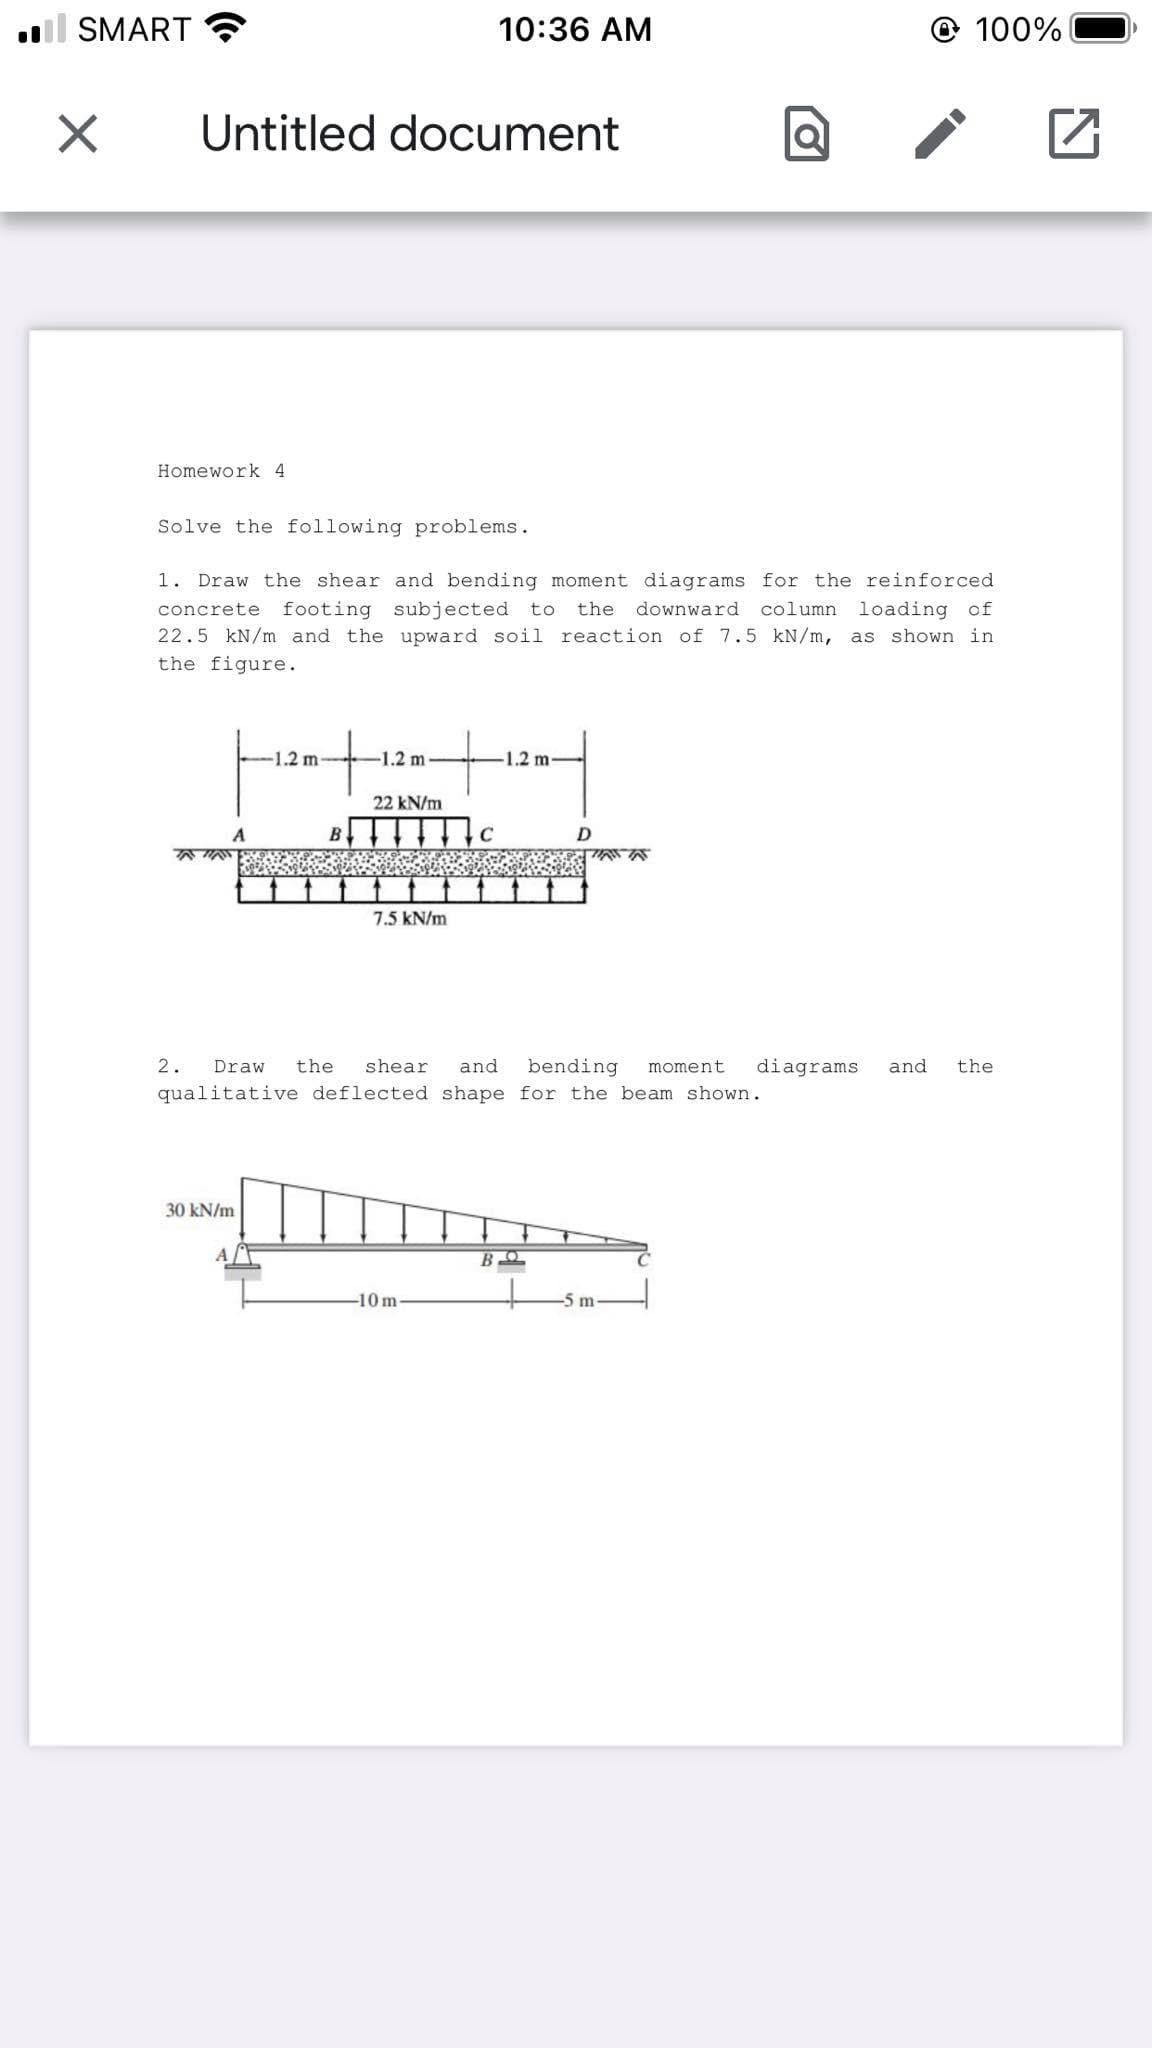 l SMART
10:36 AM
© 100%
Untitled document
Homework 4
Solve the following problems.
1. Draw the shear and bending moment diagrams for the reinforced
column loading of
22.5 kN/m and the upward soil reaction of 7.5 kN/m, as shown in
concrete
footing subjected to
the downward
the figure.
-1.2 m-
-1.2 m
1.2 m
22 kN/m
A
B
C
7.5 kN/m
2.
Draw
the
shear
and
bending
moment
diagrams
and
the
qualitative deflected shape for the beam shown.
30 kN/m
-10m
-5 m
